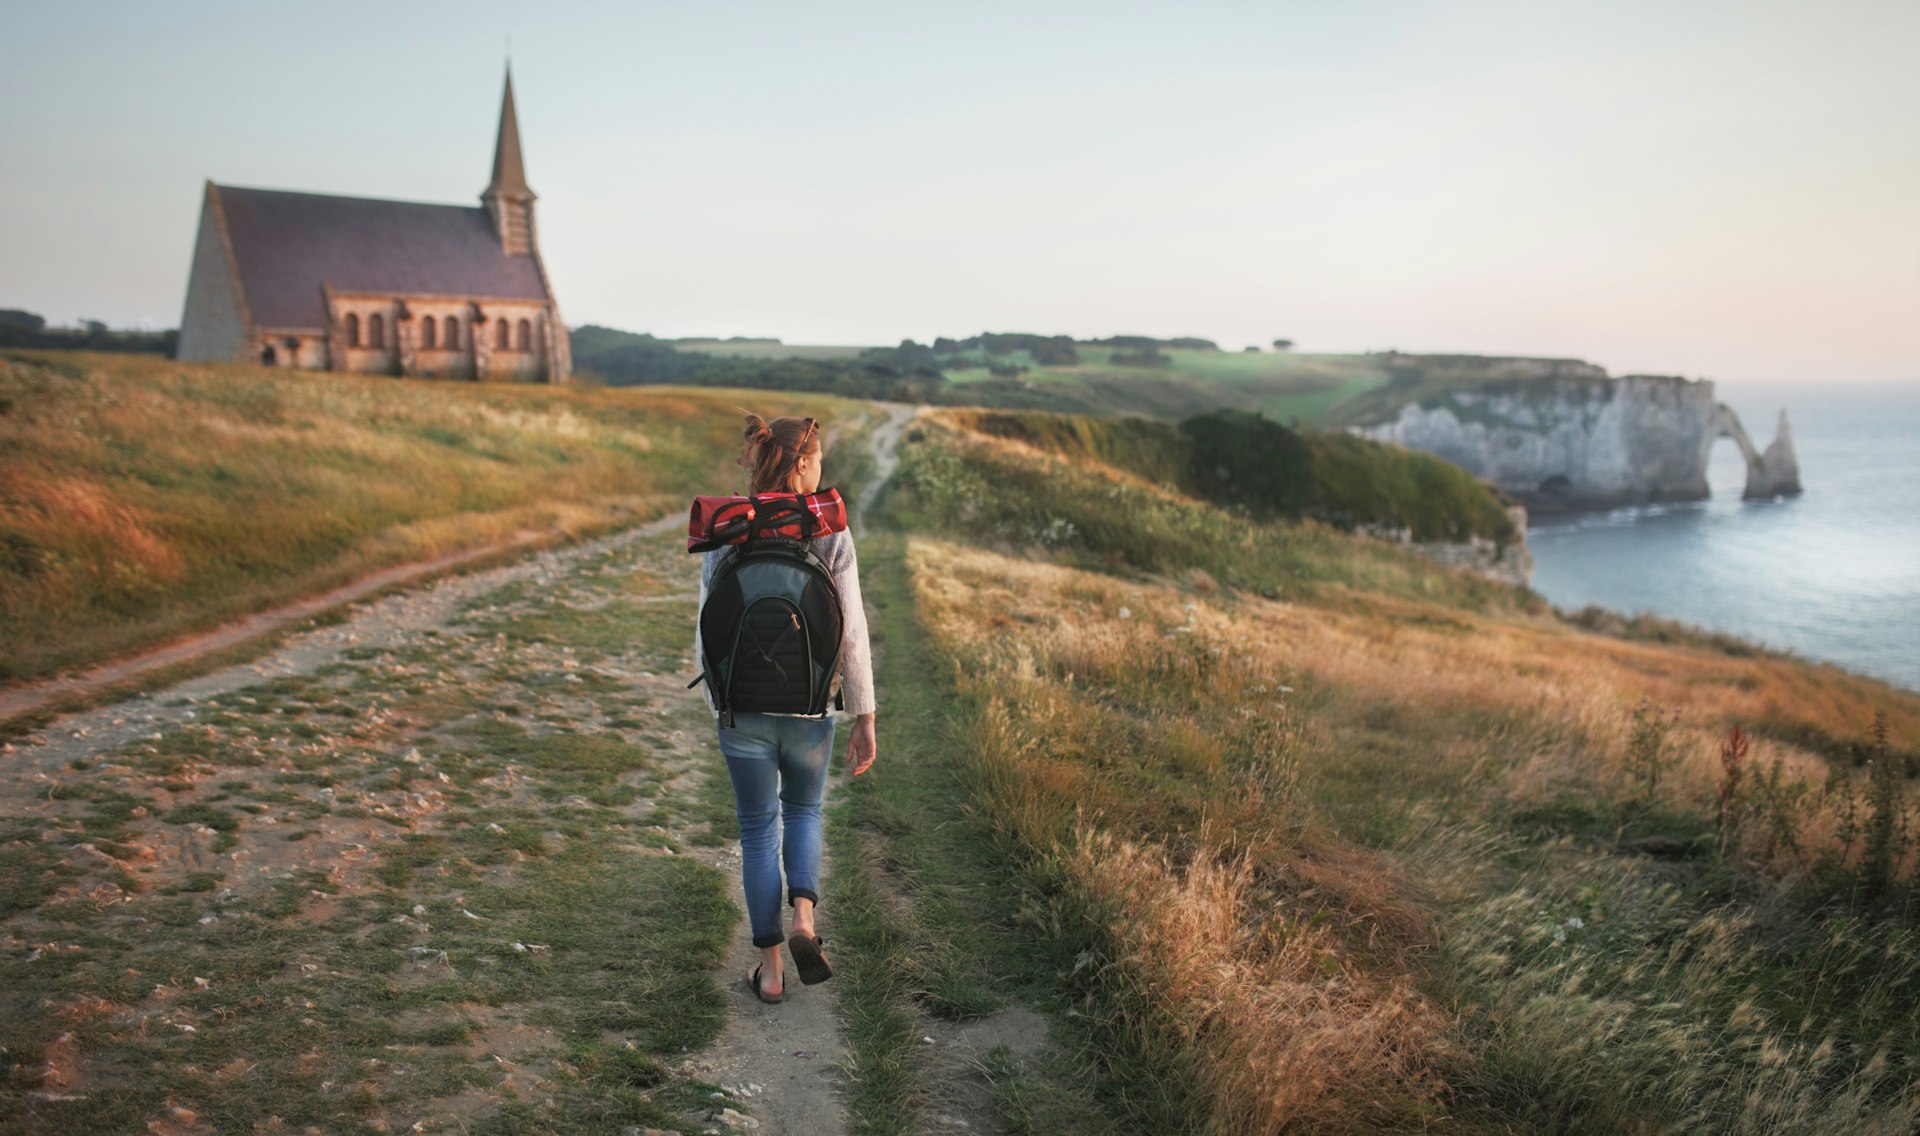 A hiker with a backpack walks along a clifftop path looking out to sea on her right. To her left is a small church with a spire.